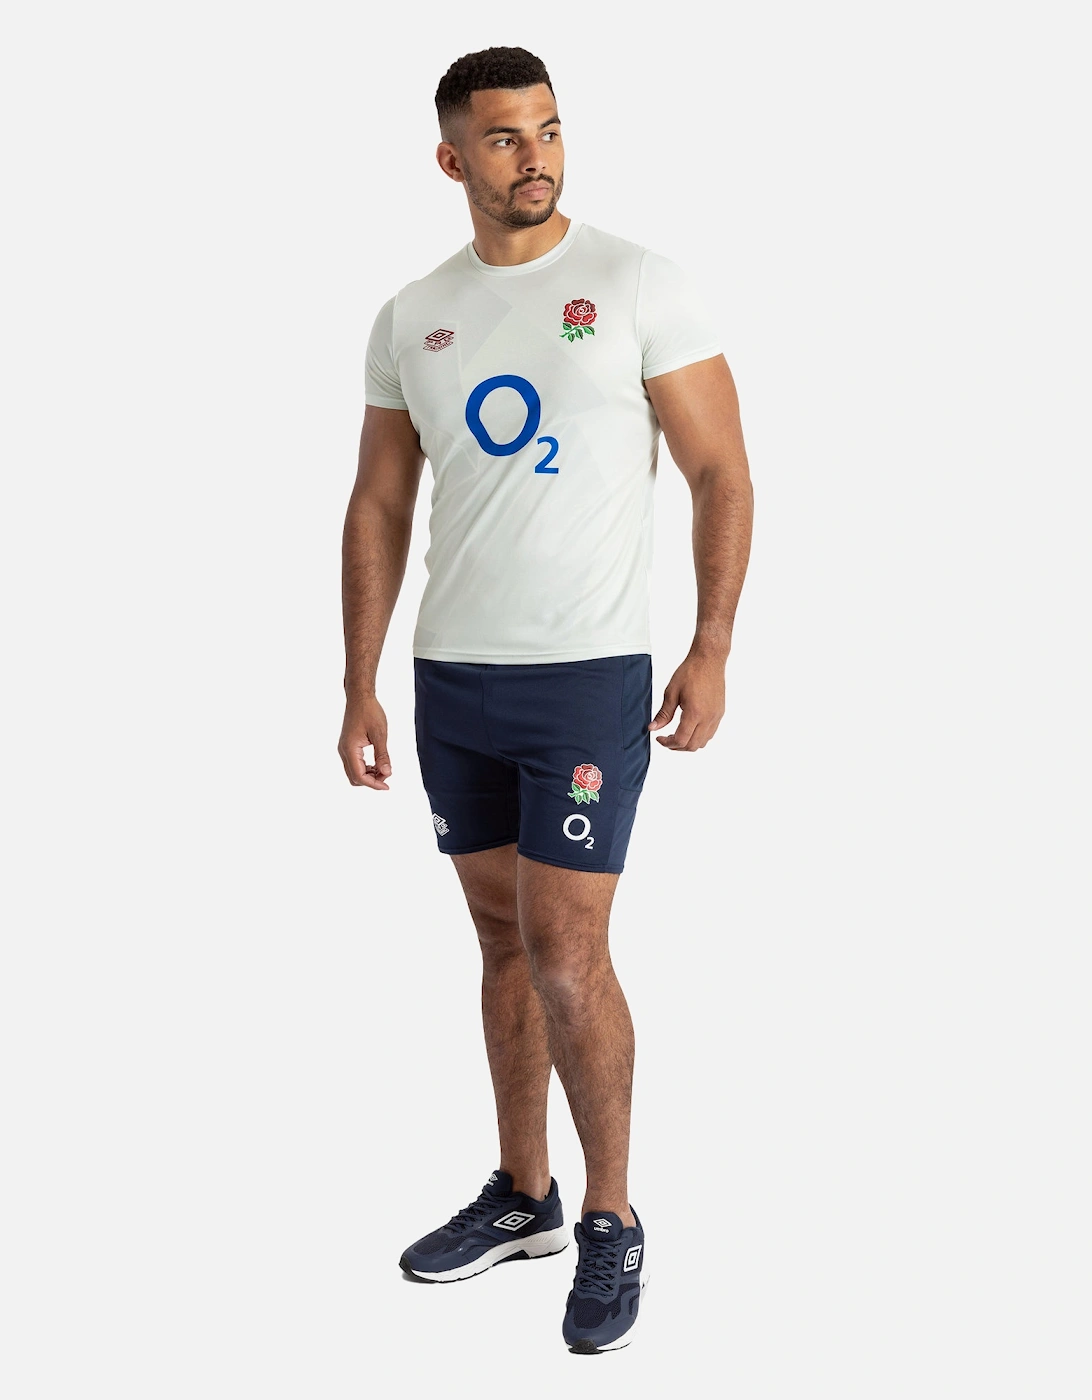 Mens 23/24 Knitted England Rugby Shorts